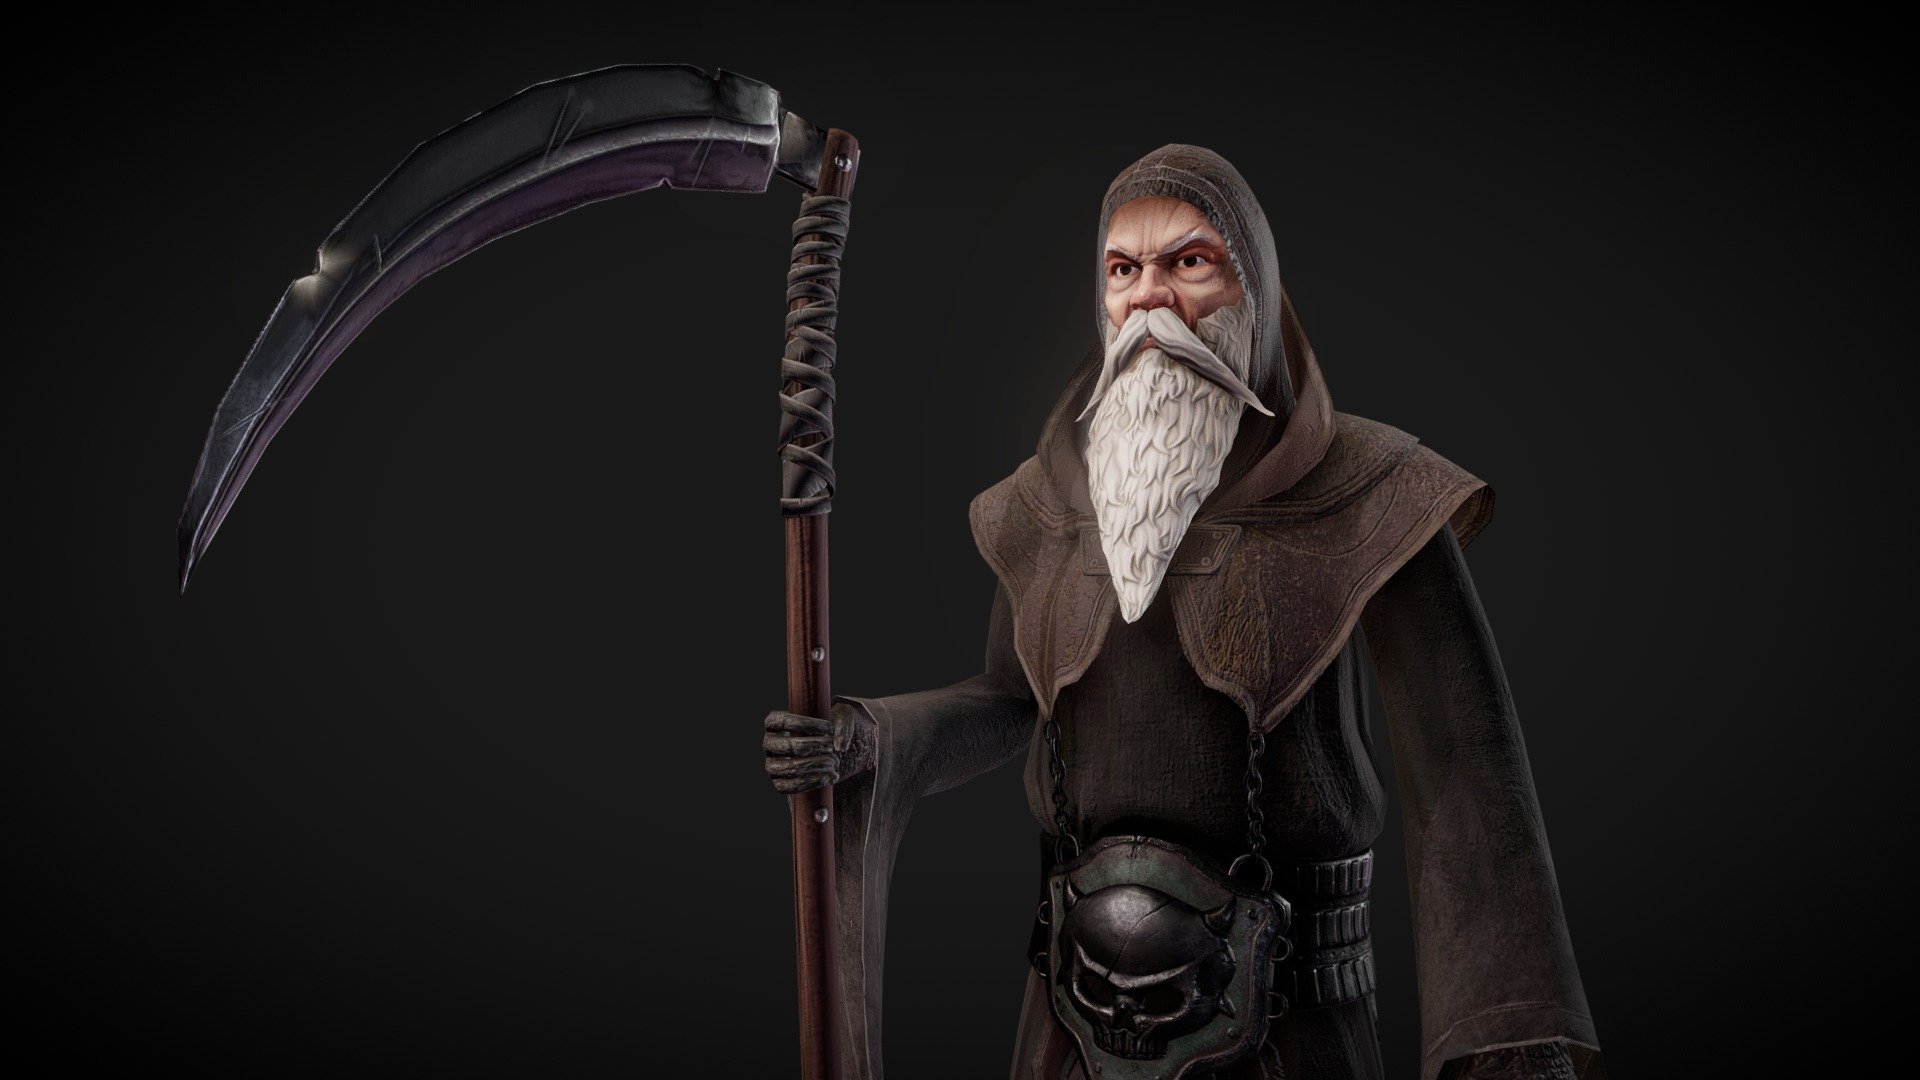 Awakener Skin for the Necromancer.

3D Character modeled and animated for the Shardhunters game by Lycan Studio 3d model